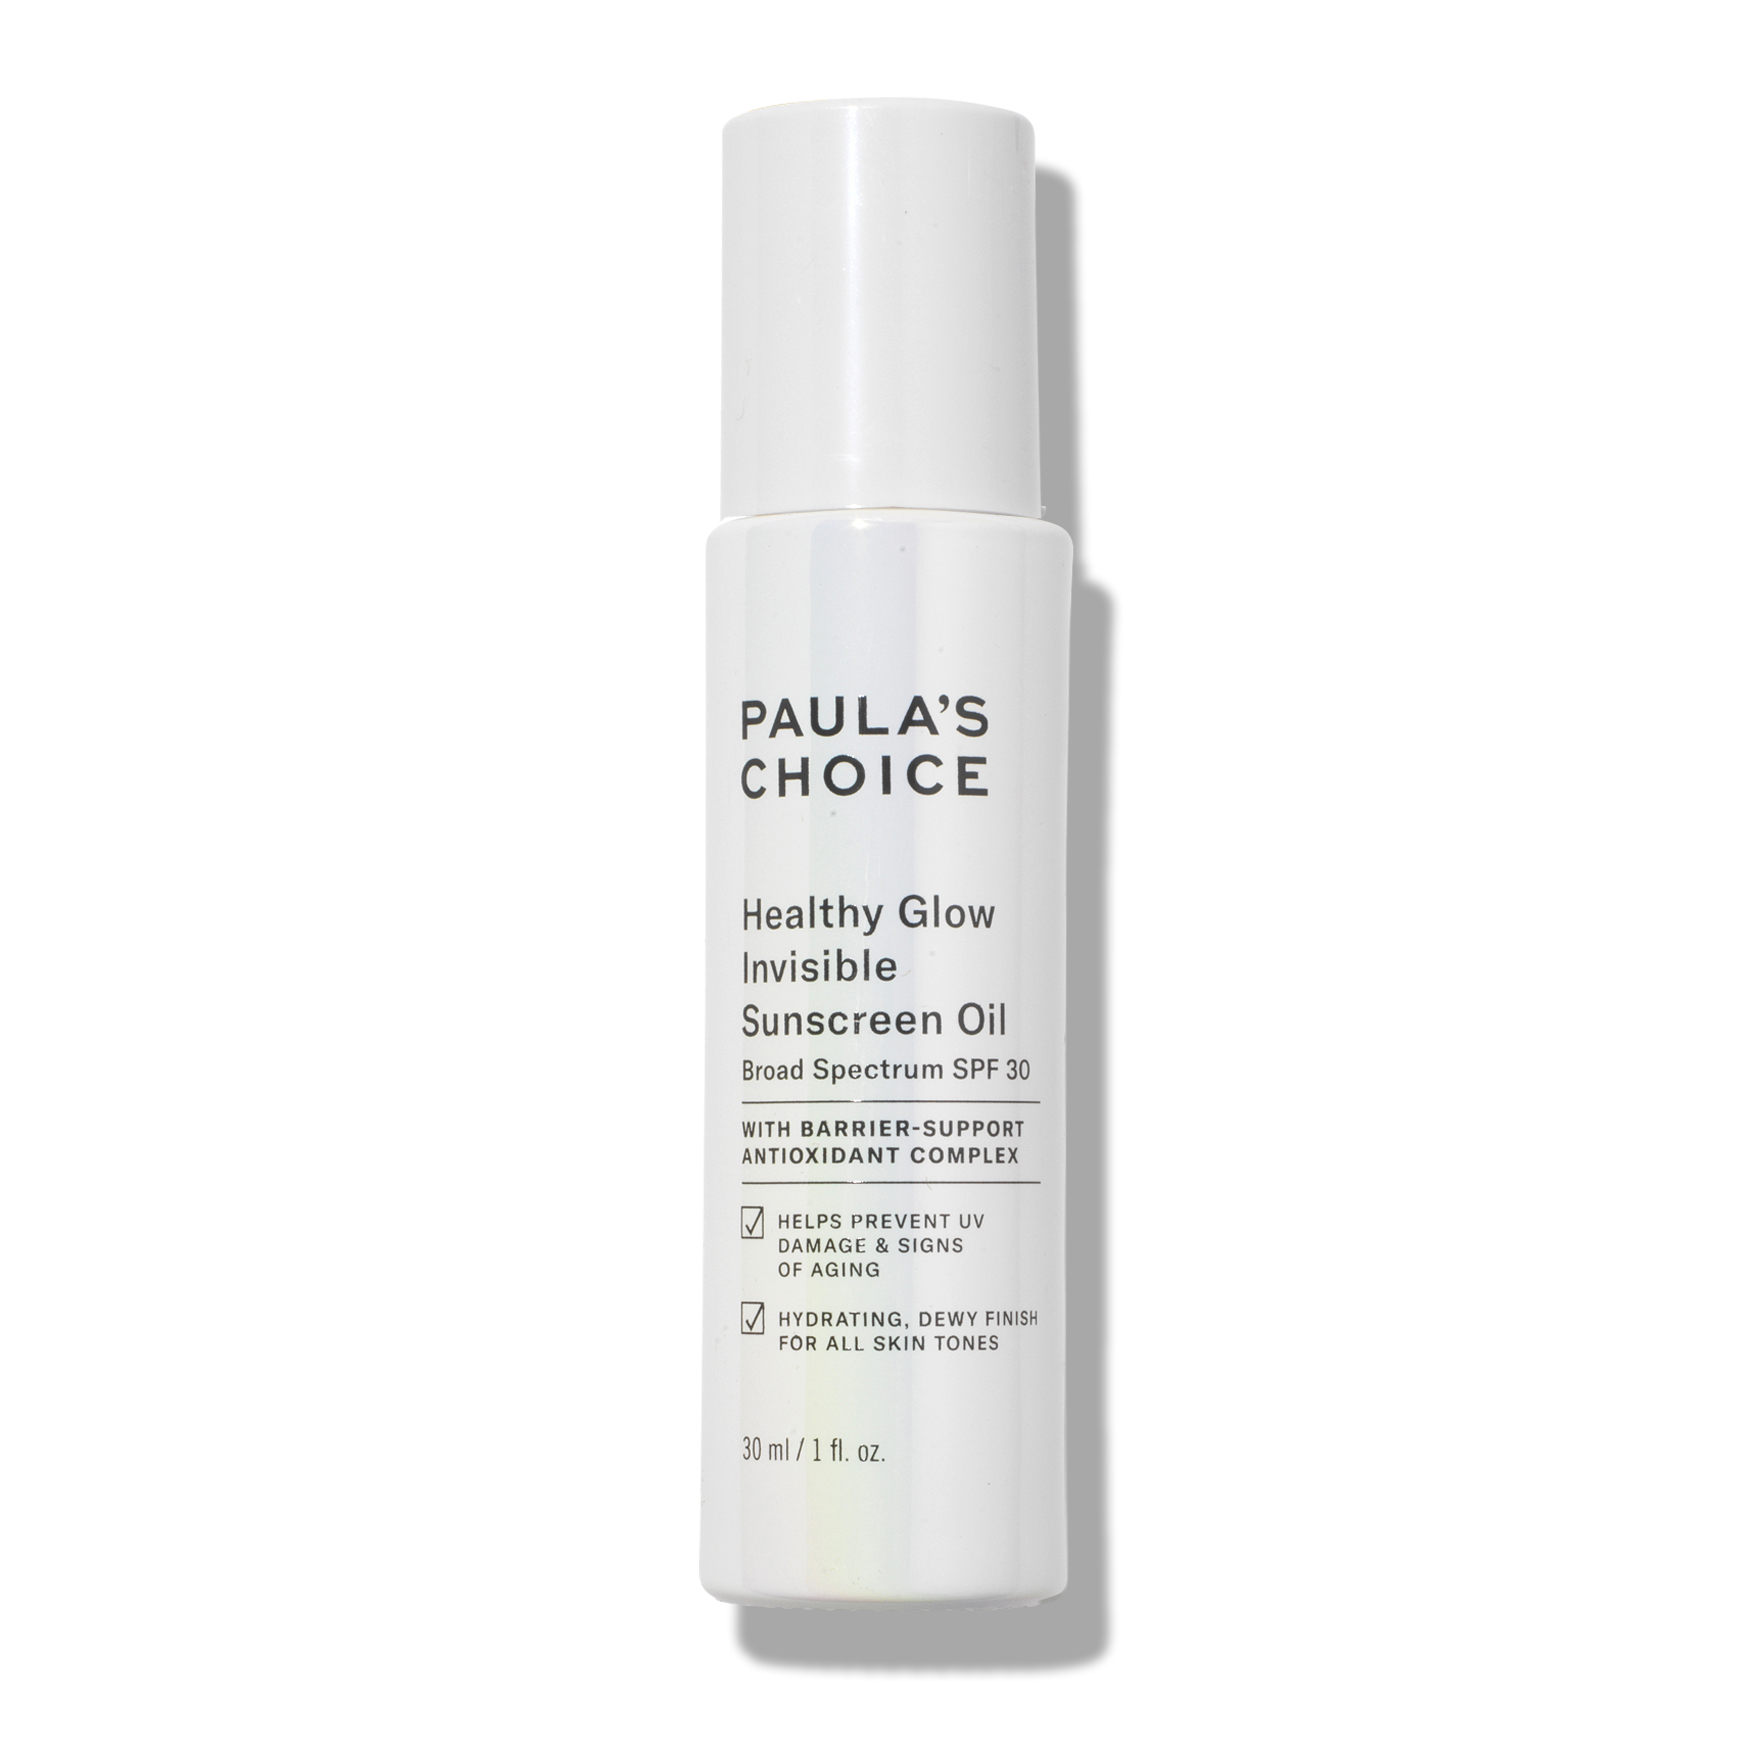 Paula's Choice Healthy Glow Invisible Sunscreen Oil SPF 30 | Space NK